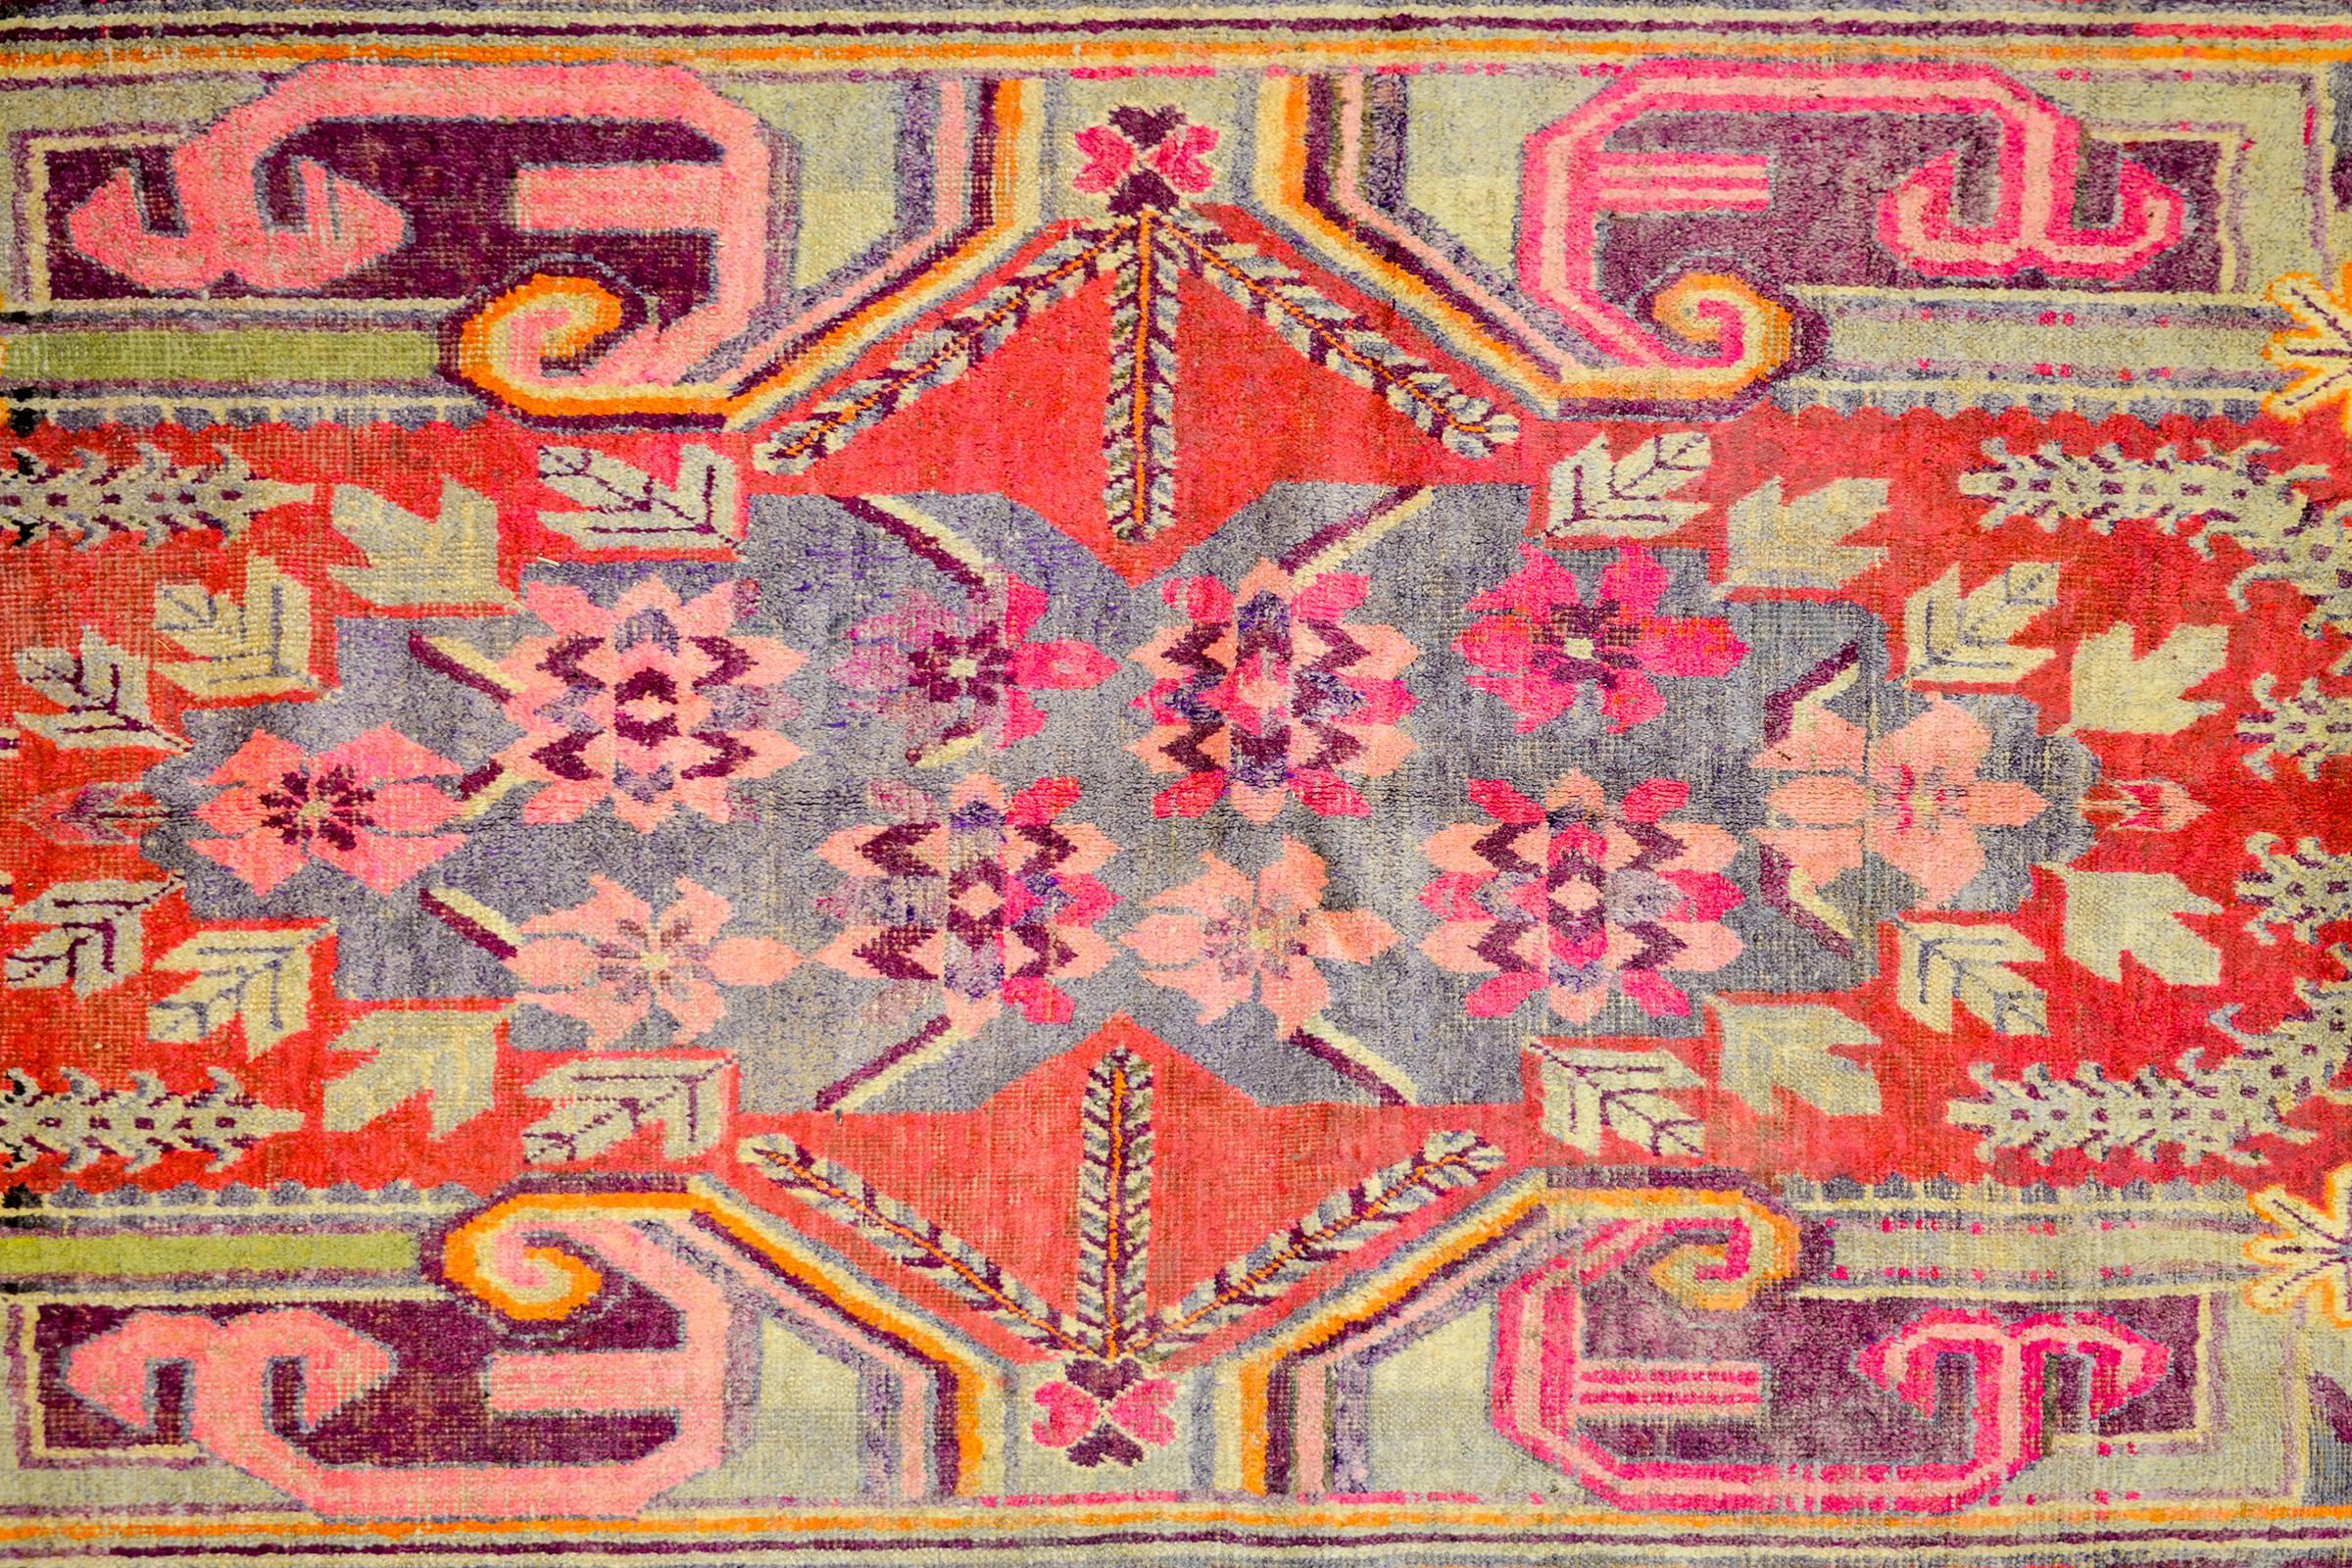 A wonderful early 20th century Central Asian Samarkand rug with an incredible asymmetrical large-scale floral medallion woven in crimson, violet, pink, black, and cream colored wool. The medallion lives amidst a crimson field with flowering branches